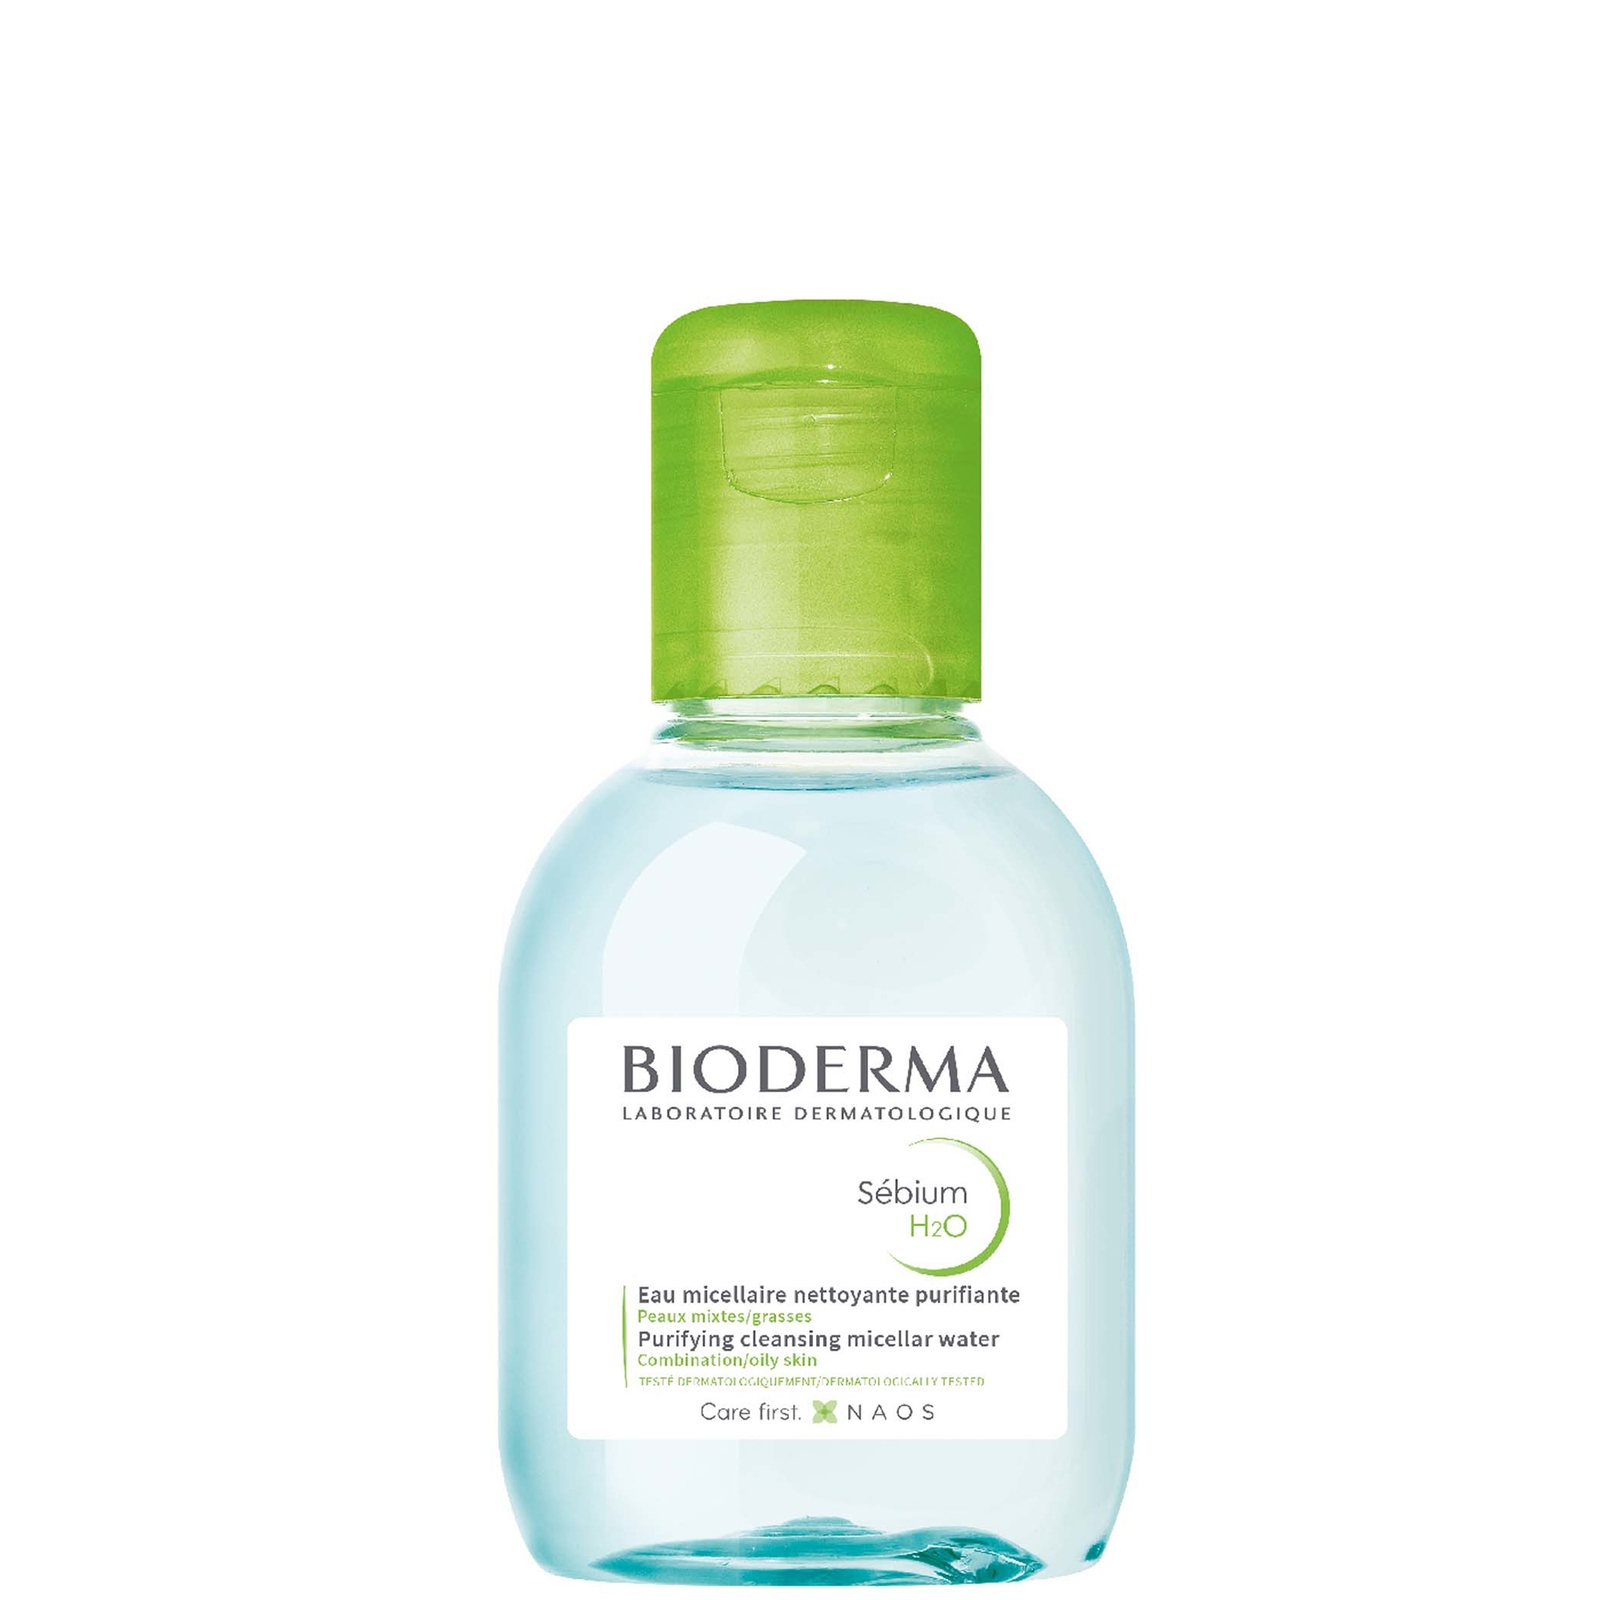 Photos - Facial / Body Cleansing Product Bioderma Sébium Cleansing Micellar Water for Blemish-Prone Skin 100ml 2863 